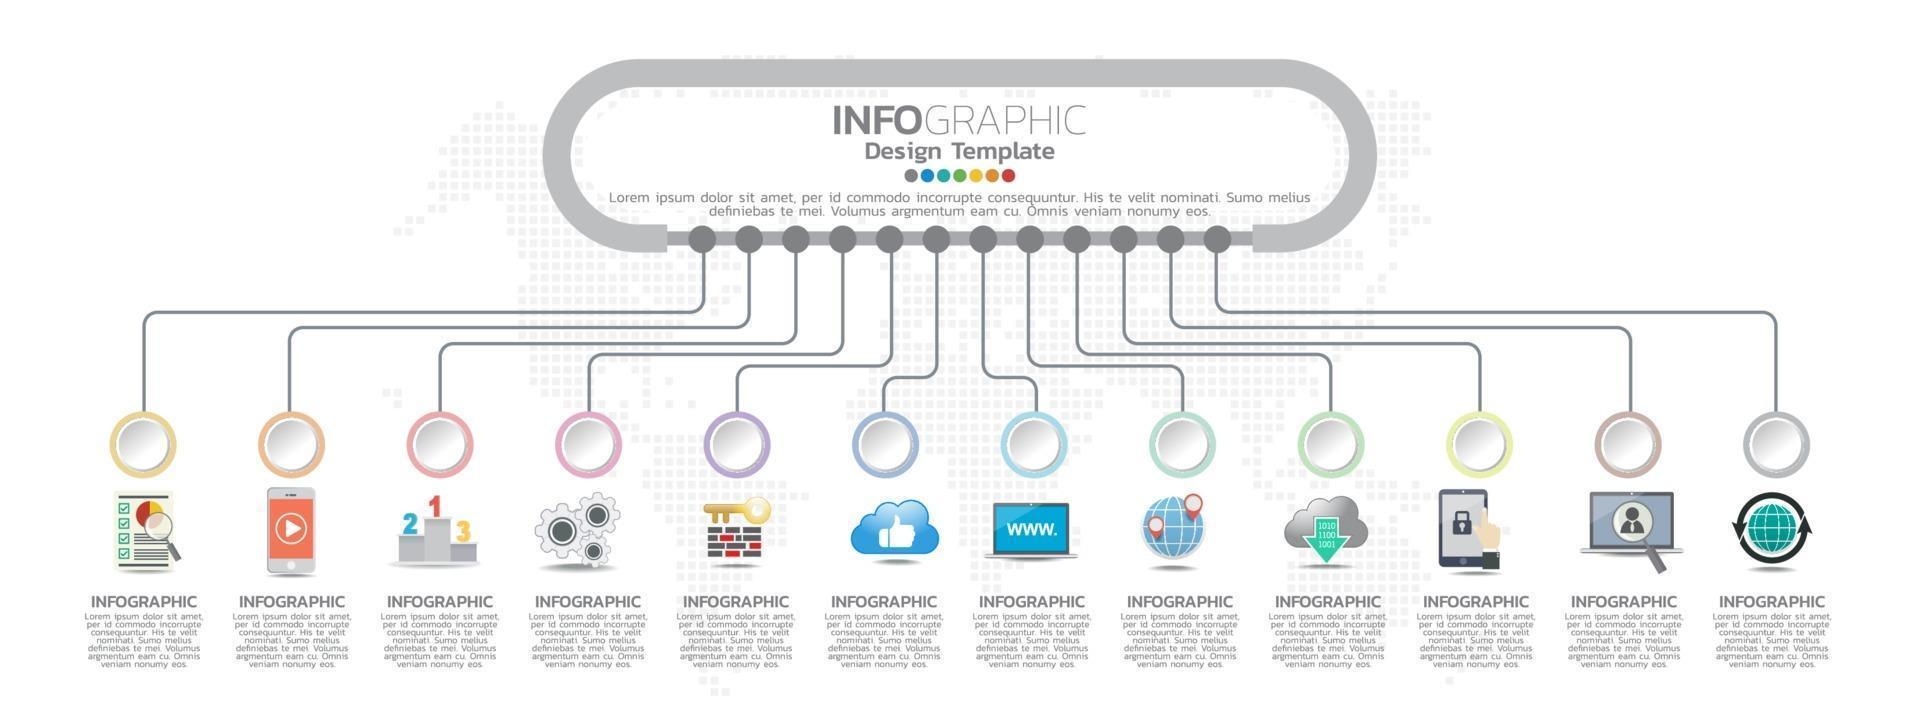 Timeline infographics design for 12 months with business concept vector